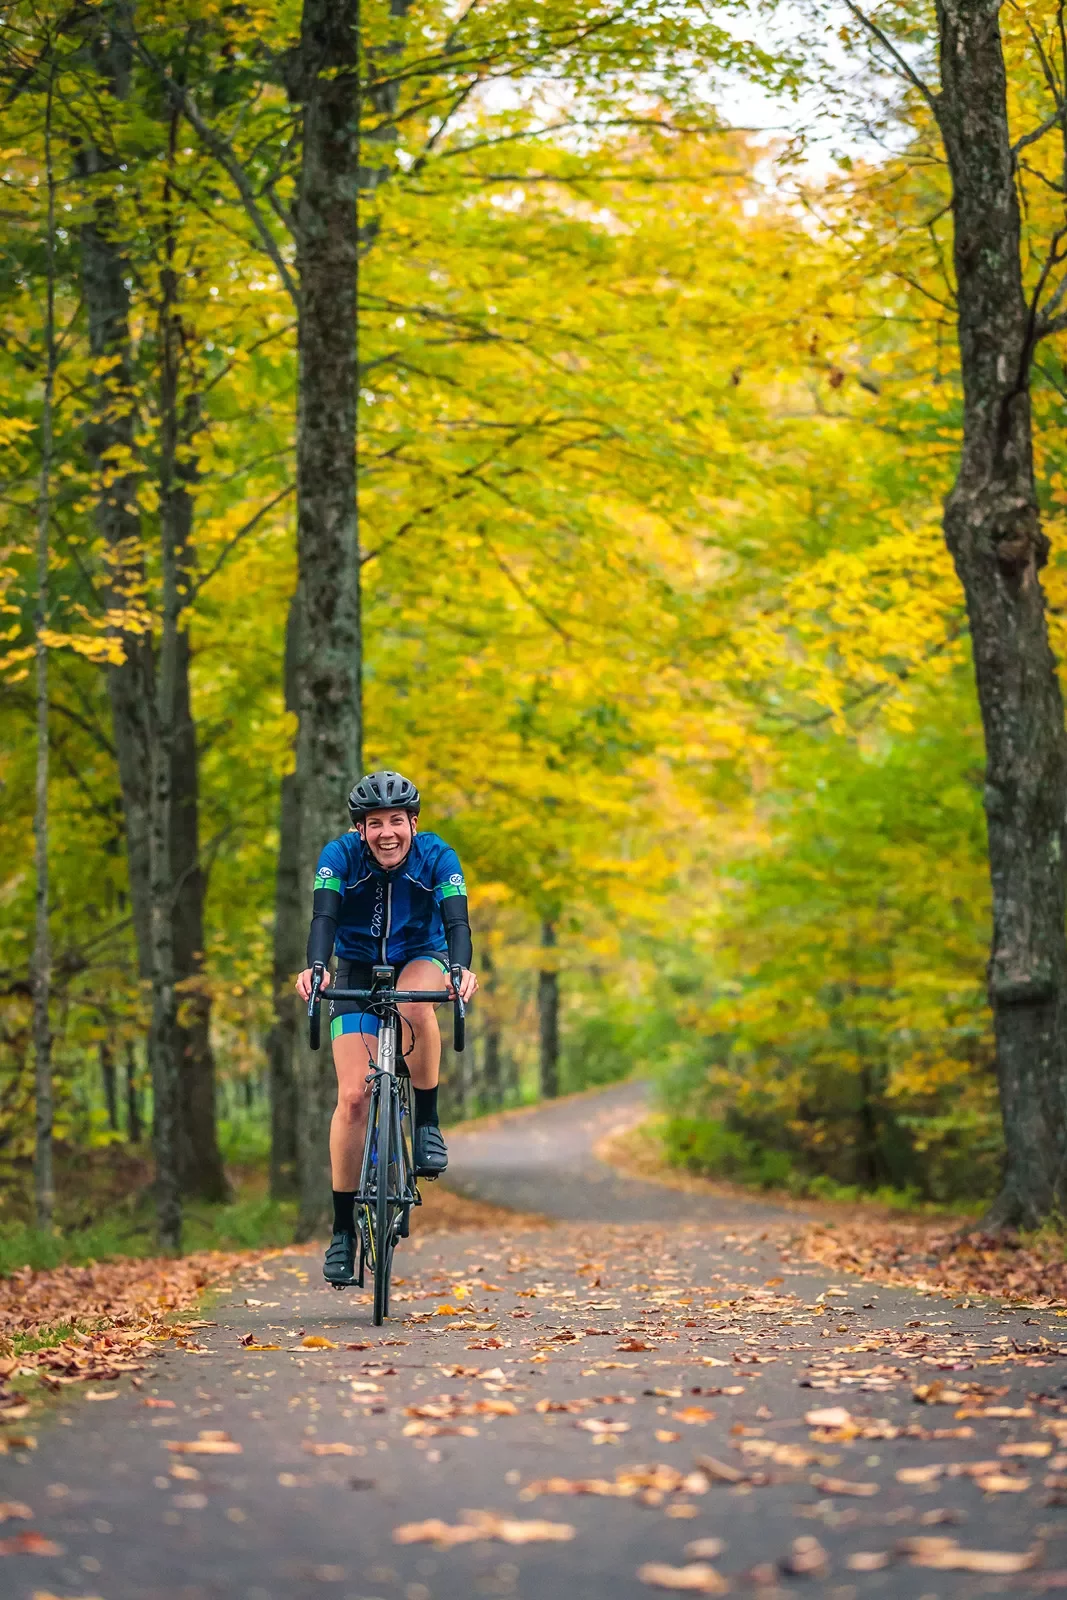 Guest cycling down fall road, facing camera and smiling.